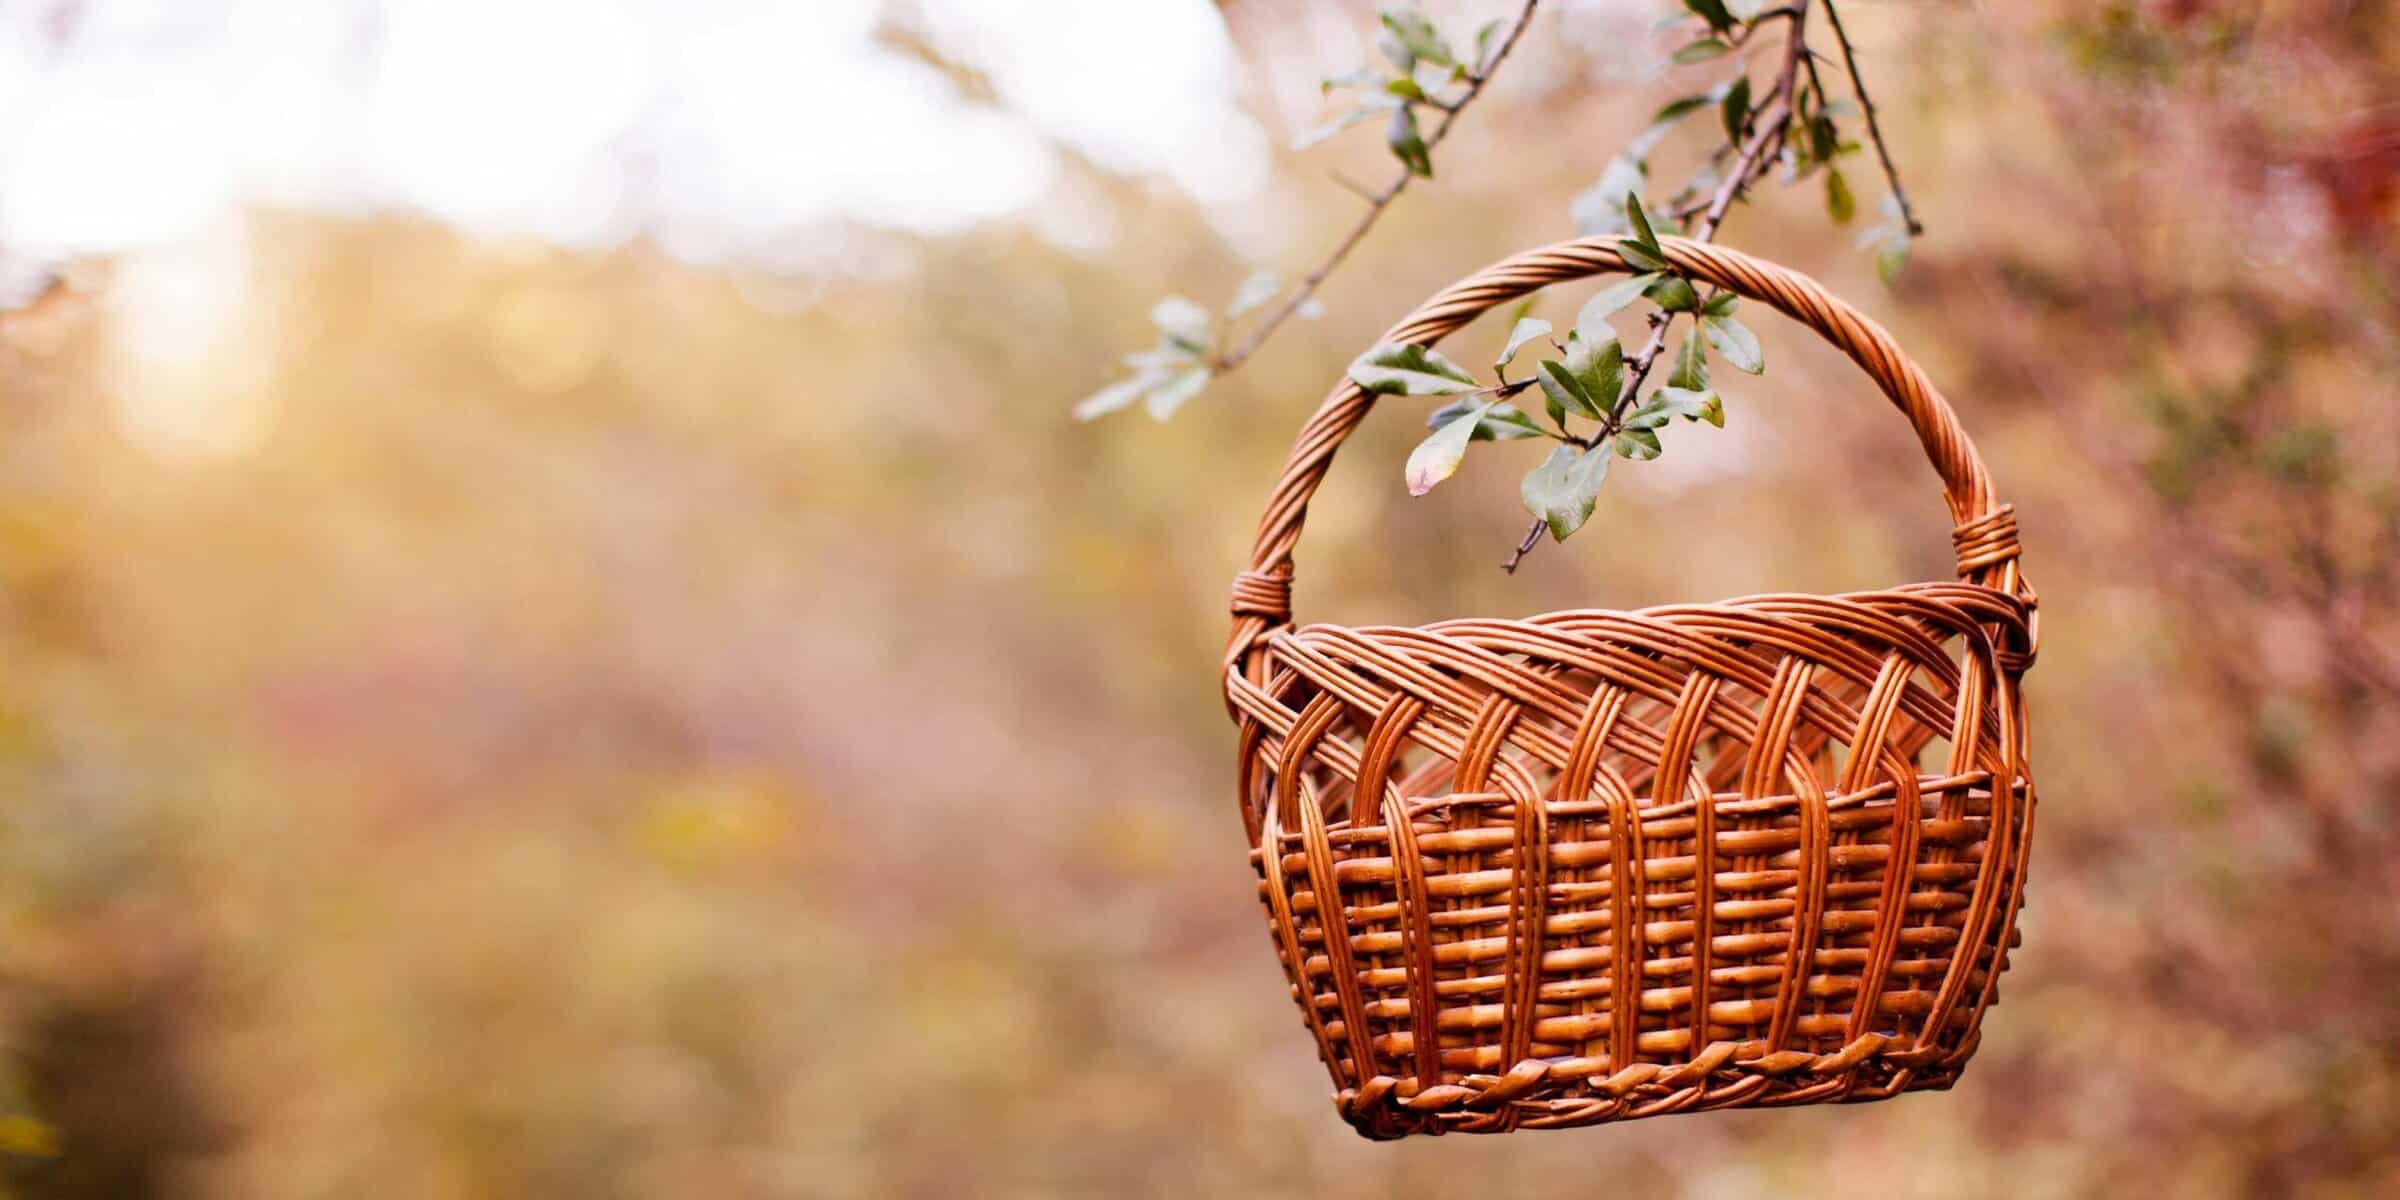 How to Clean A Wicker Basket in 3 Easy Steps!